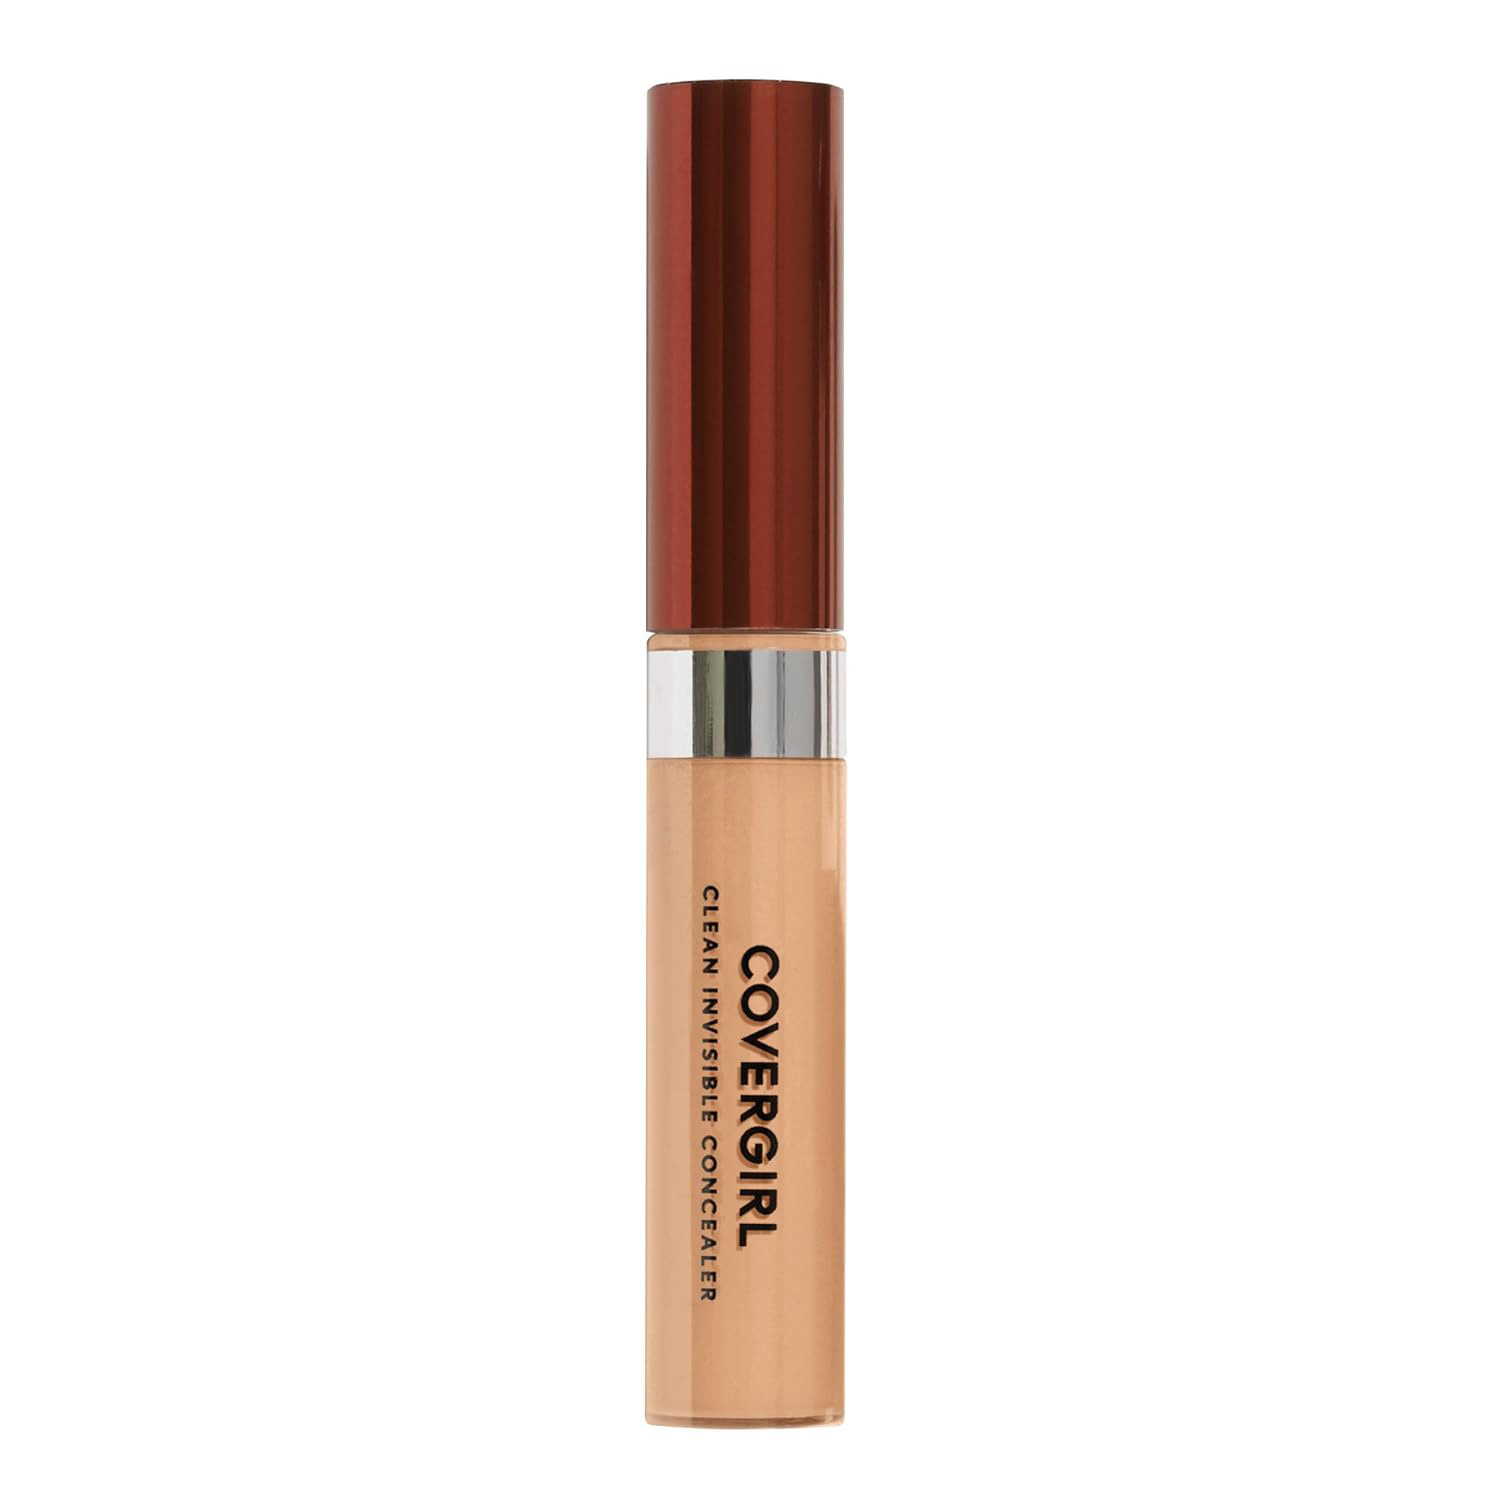 COVERGIRL Clean Invisible Liquid Concealer in the shade honey